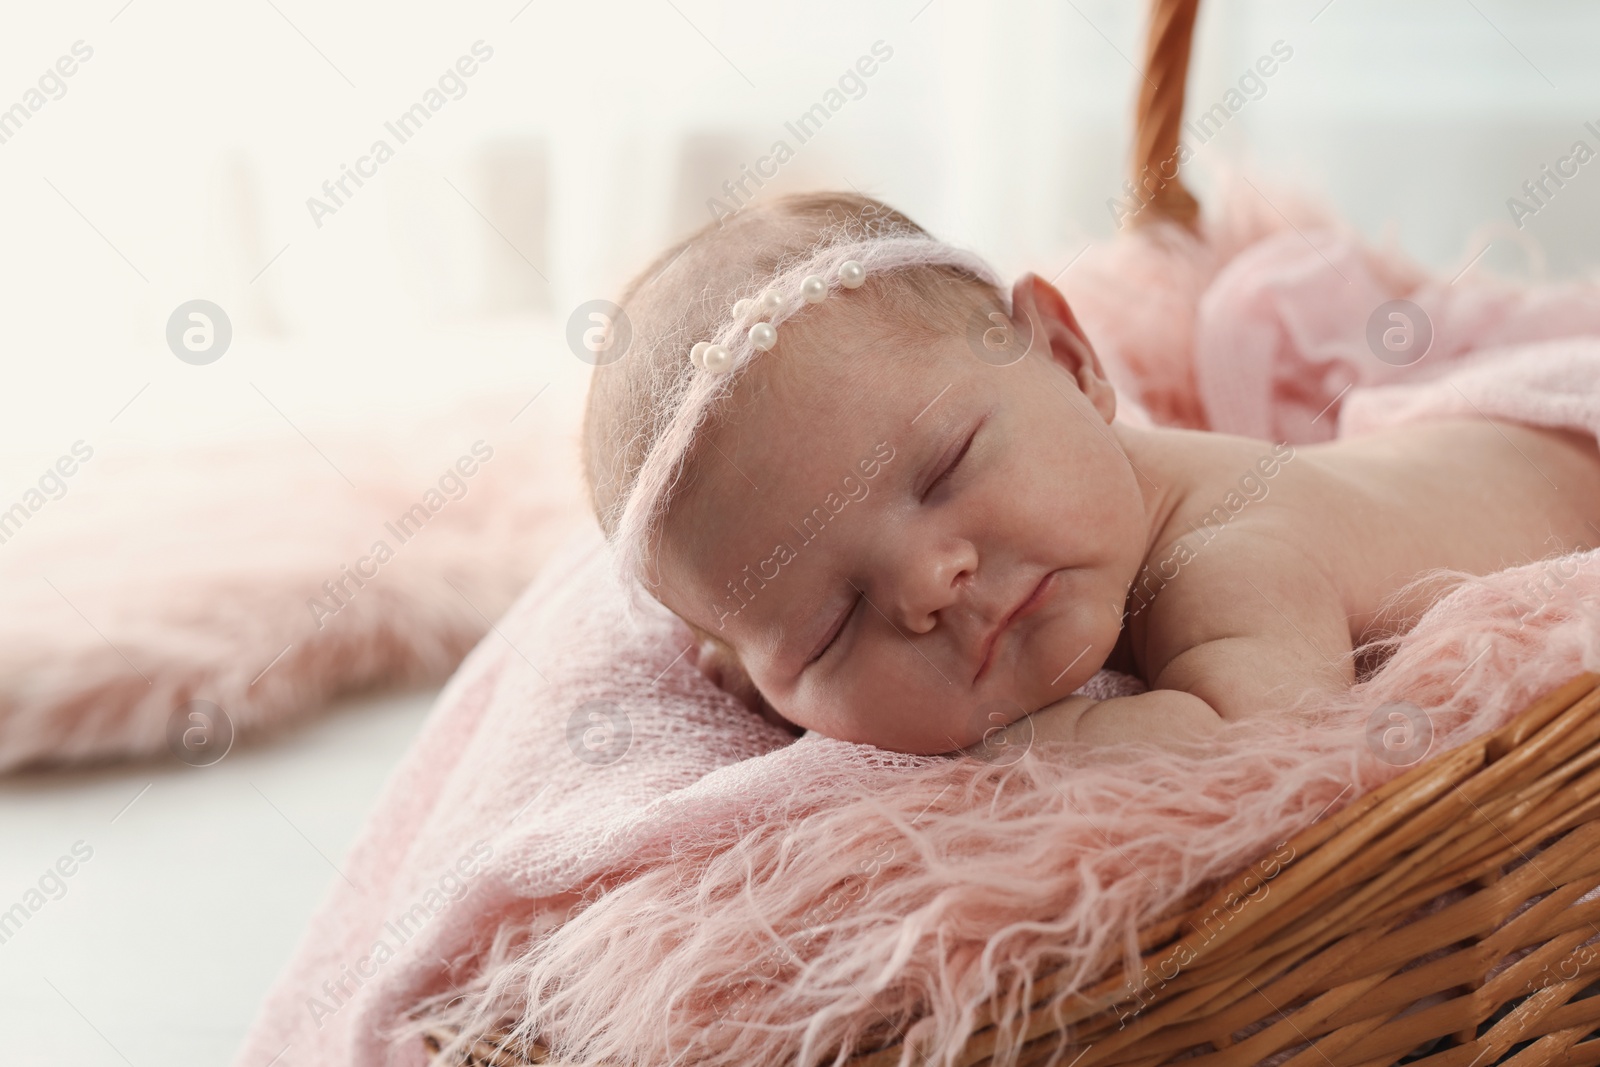 Photo of Adorable little baby sleeping in wicker basket at home